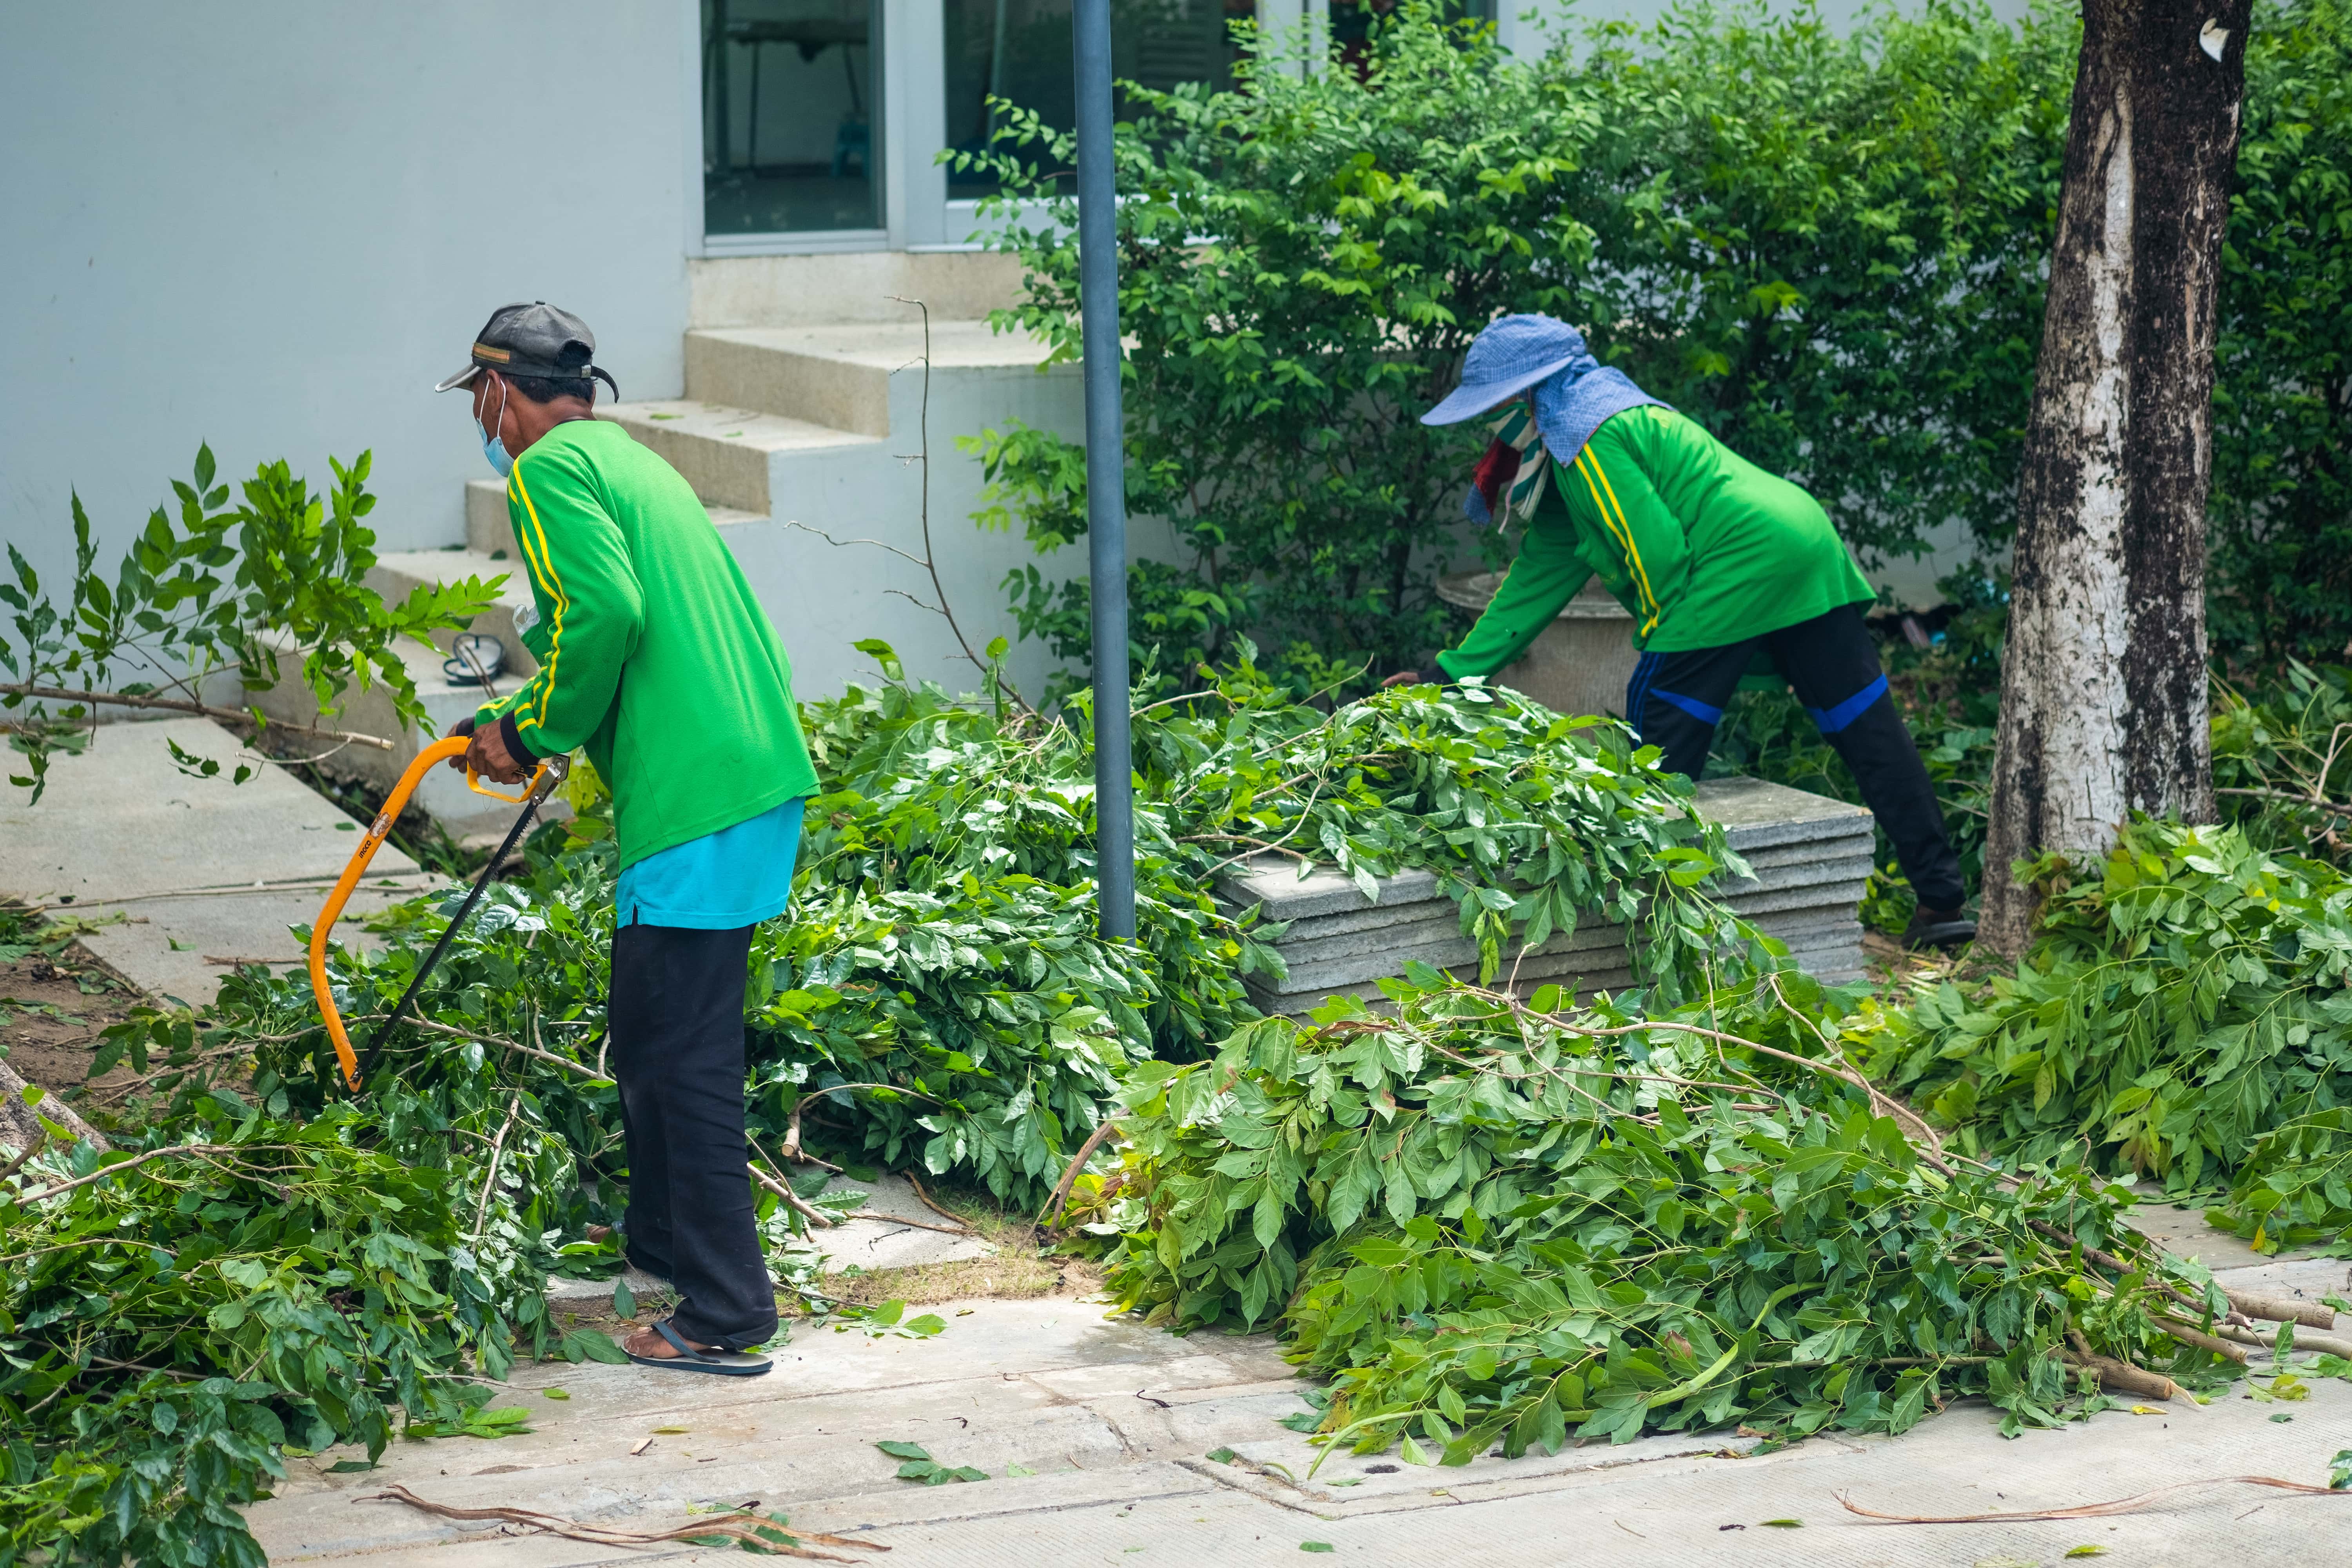 an image of two men cleaning up tree branches that have been trimmed